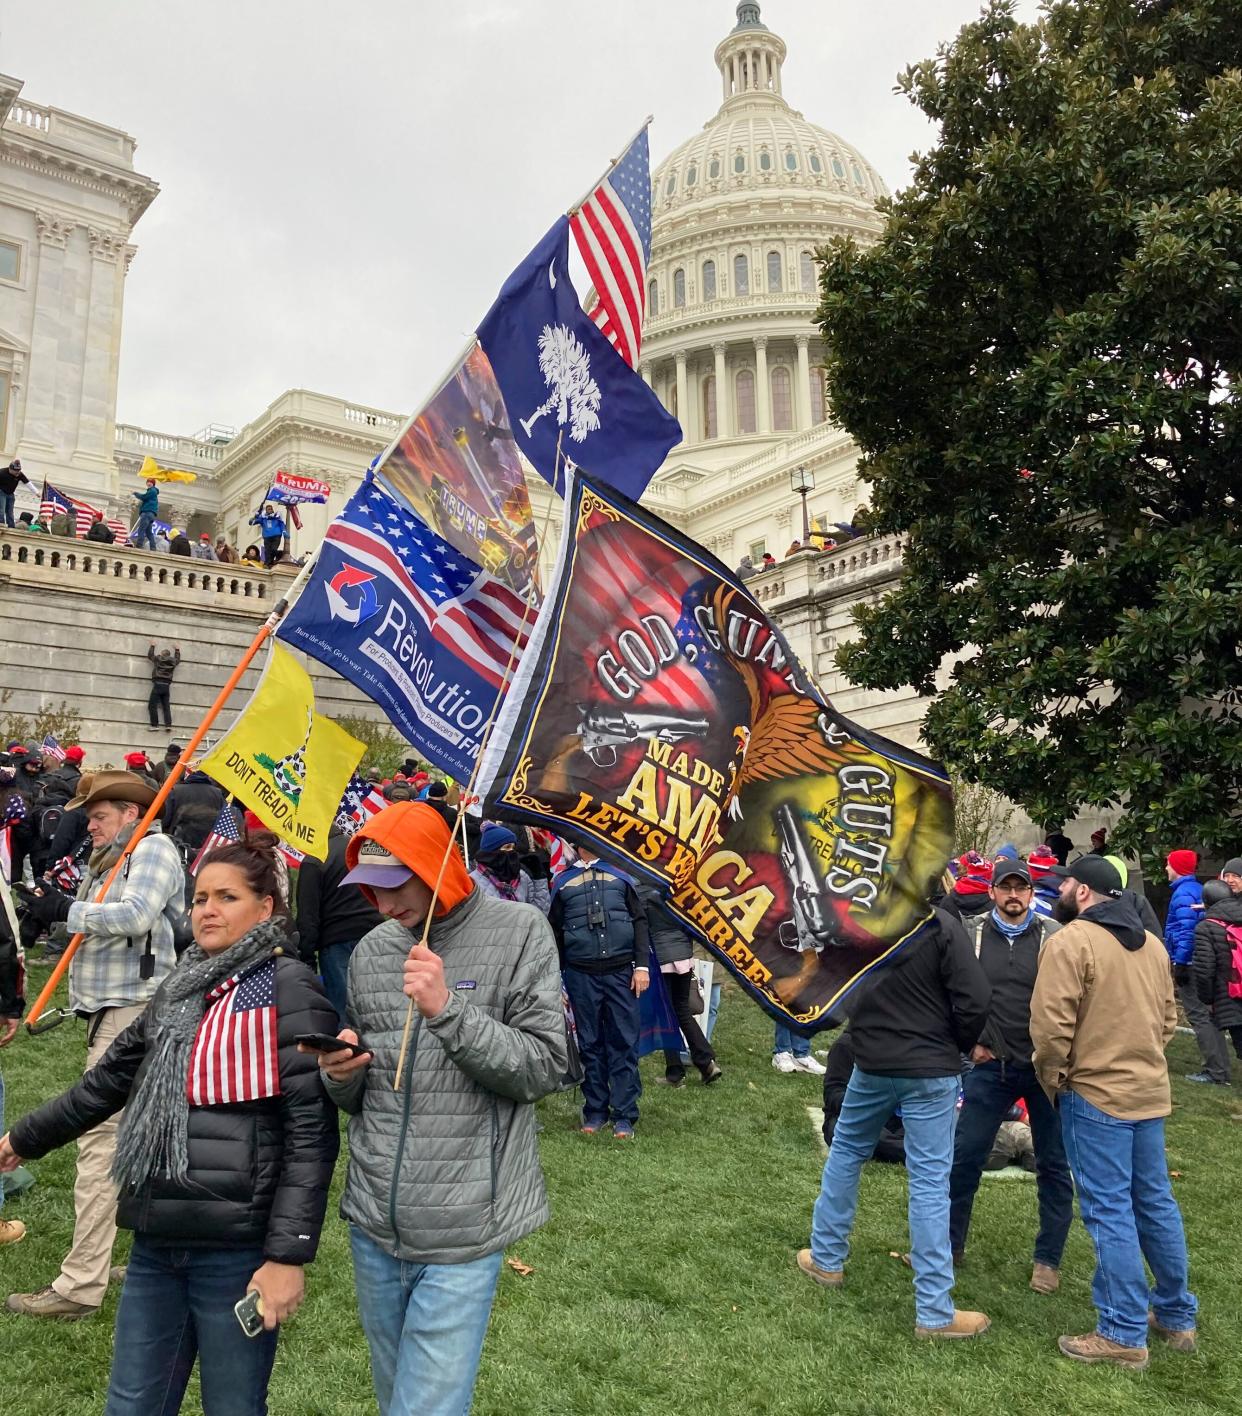 People hold flags glorifying violence and religion near the U.S. Capitol, which was breached on Jan. 6 by thousands of rioters who rejected the results of the 2020 presidential election. (Photo: zz/STRF/STAR MAX/IPx)